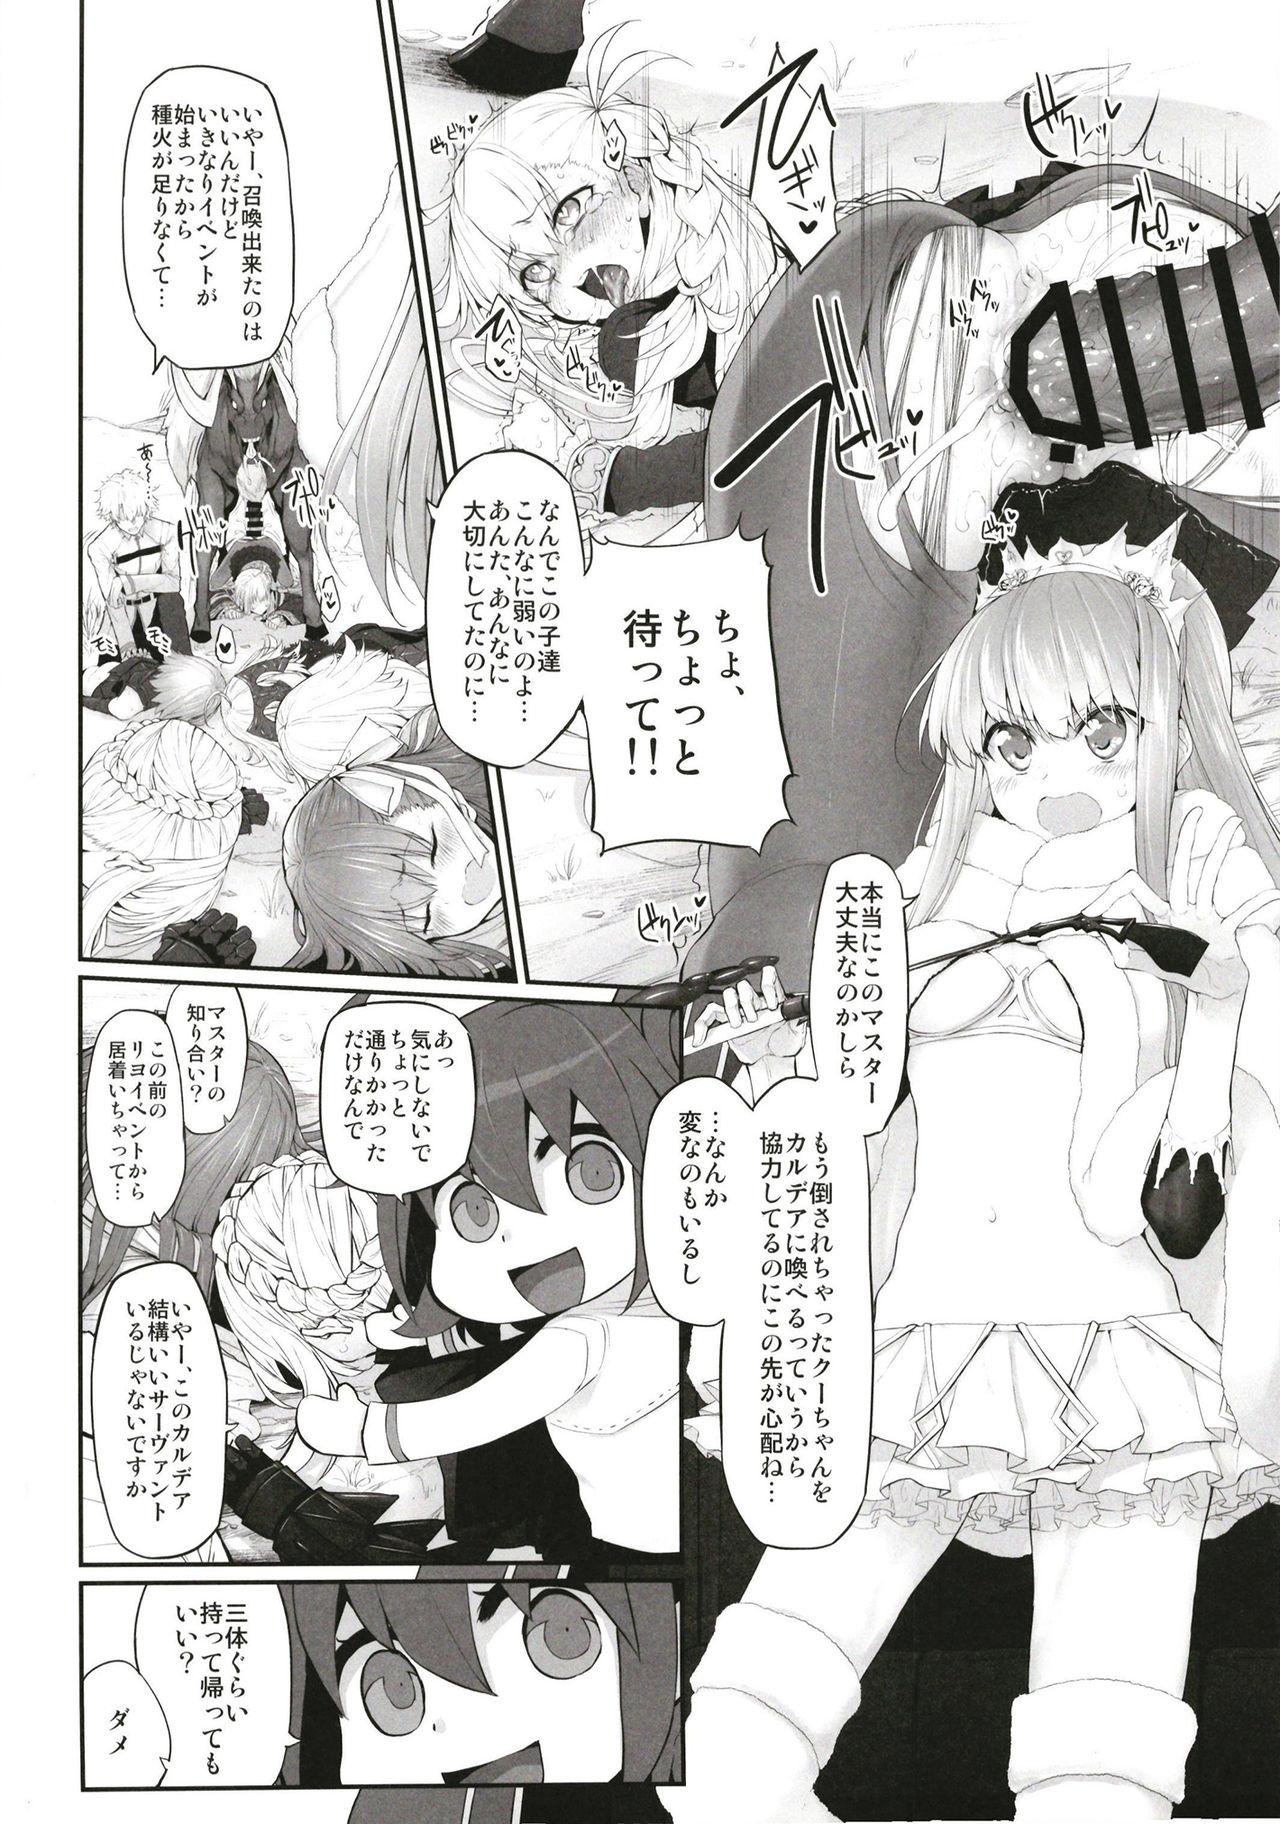 Boots Marked Girls Vol. 16 - Fate grand order Chudai - Page 3